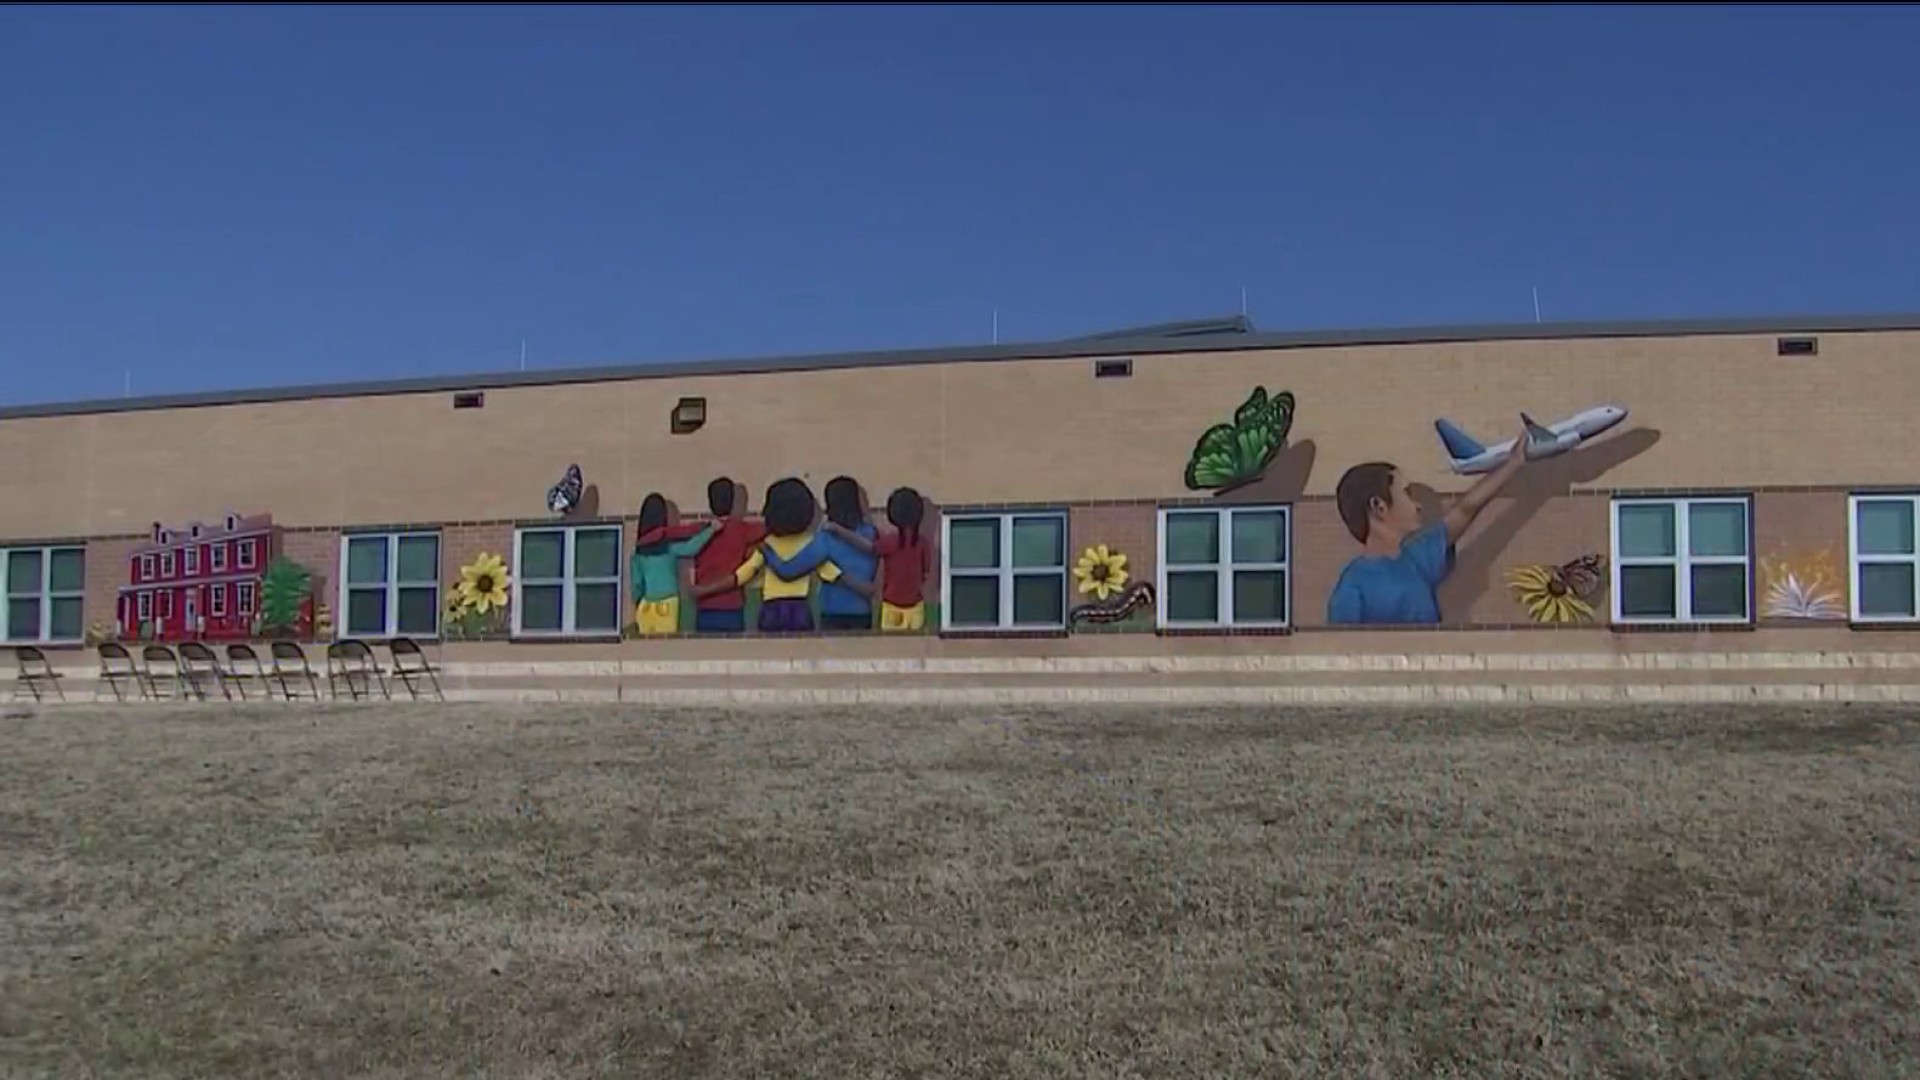 School Mural Depicts House That Was Part of Underground Railroad